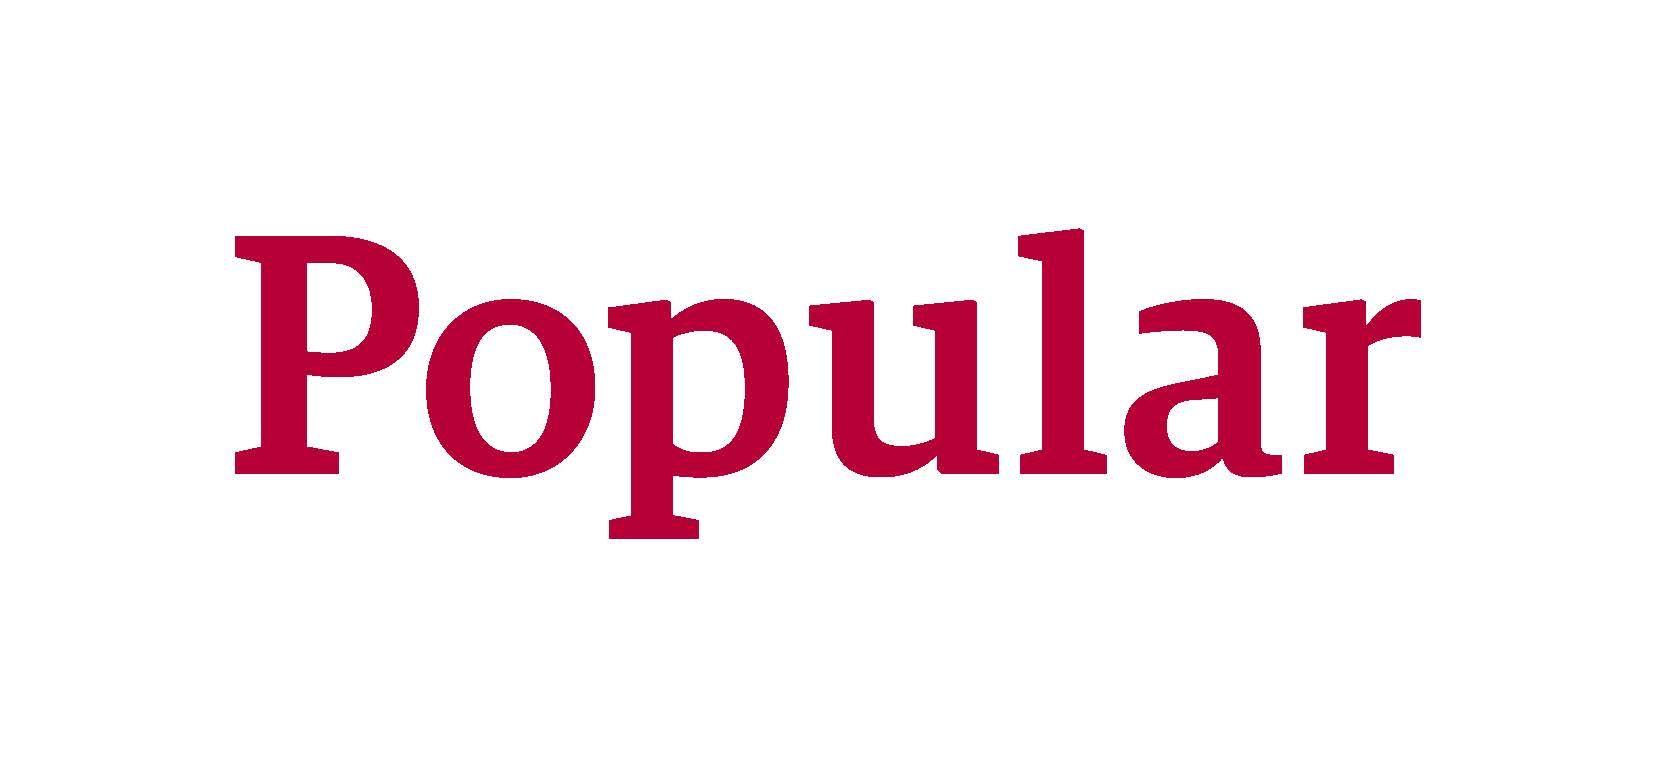 Popular Word Logo - List of Synonyms and Antonyms of the Word: Popular